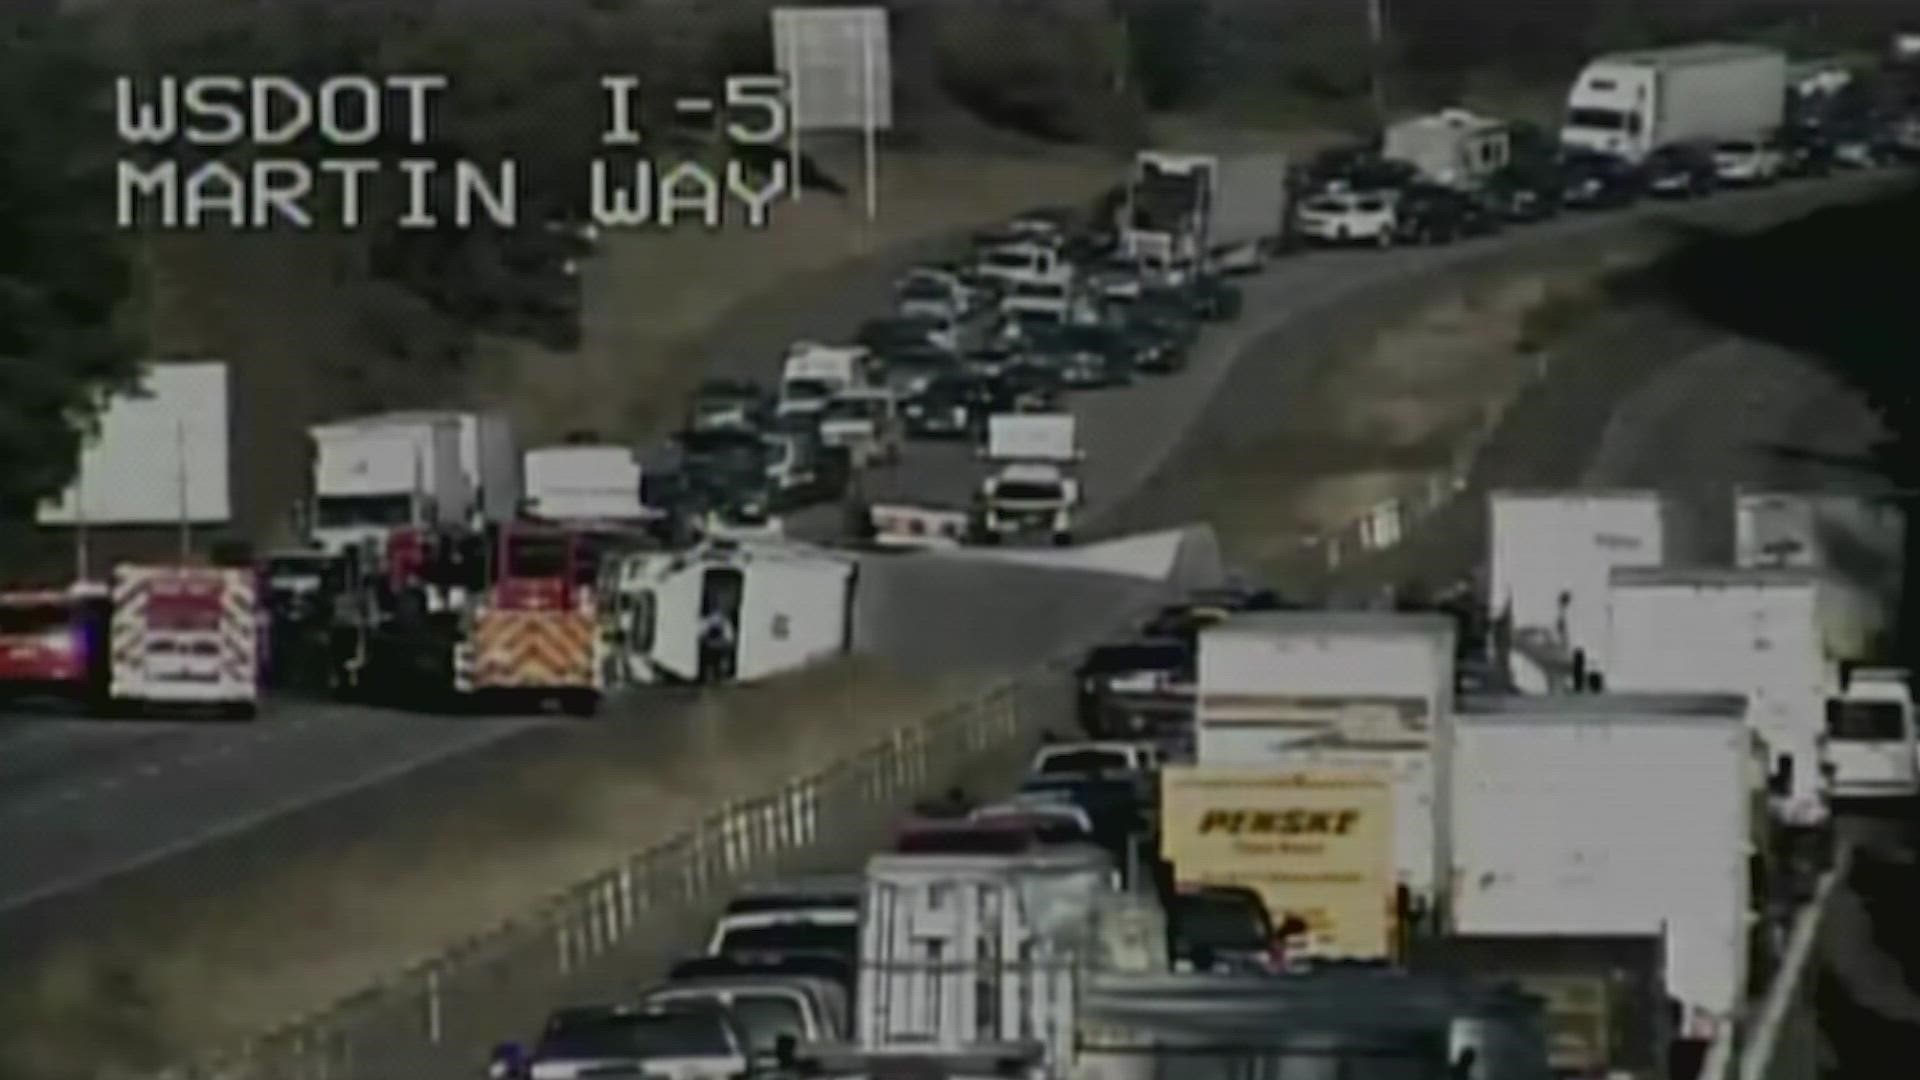 All lanes of southbound I-5 are blocked at Martin Way due to the crash.